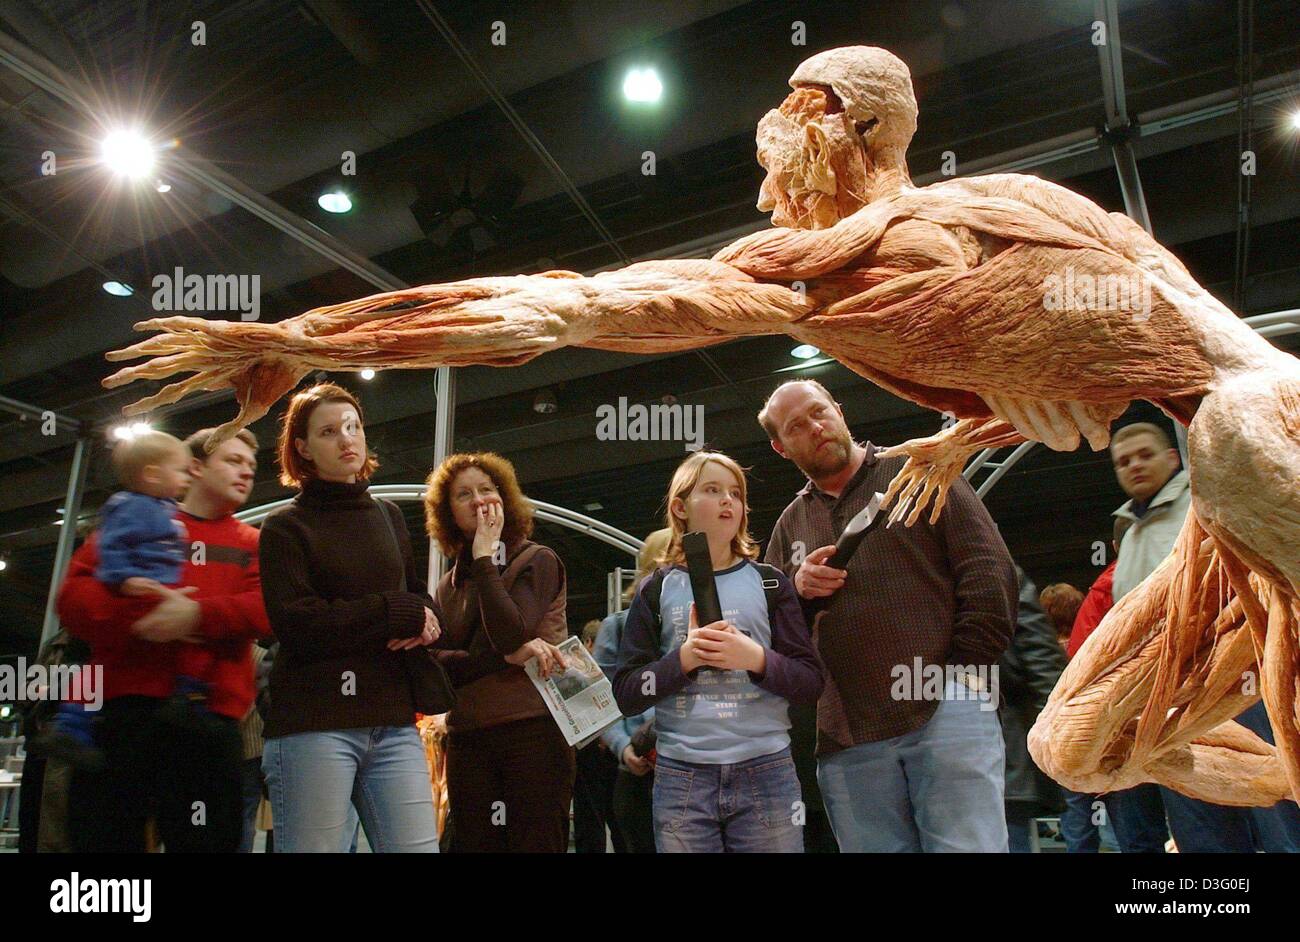 (dpa) - Visitors look at an exhibit at the Body World exhibition in Munich, Germany, 23 February 2003. After weeks of debates, the Bavarian administrative court approved on 21 February 2003 of the controversial exhibition Body Worlds to exhibit in Munich. But not all of the prepared human bodies are allowed to be exhibited. Stock Photo